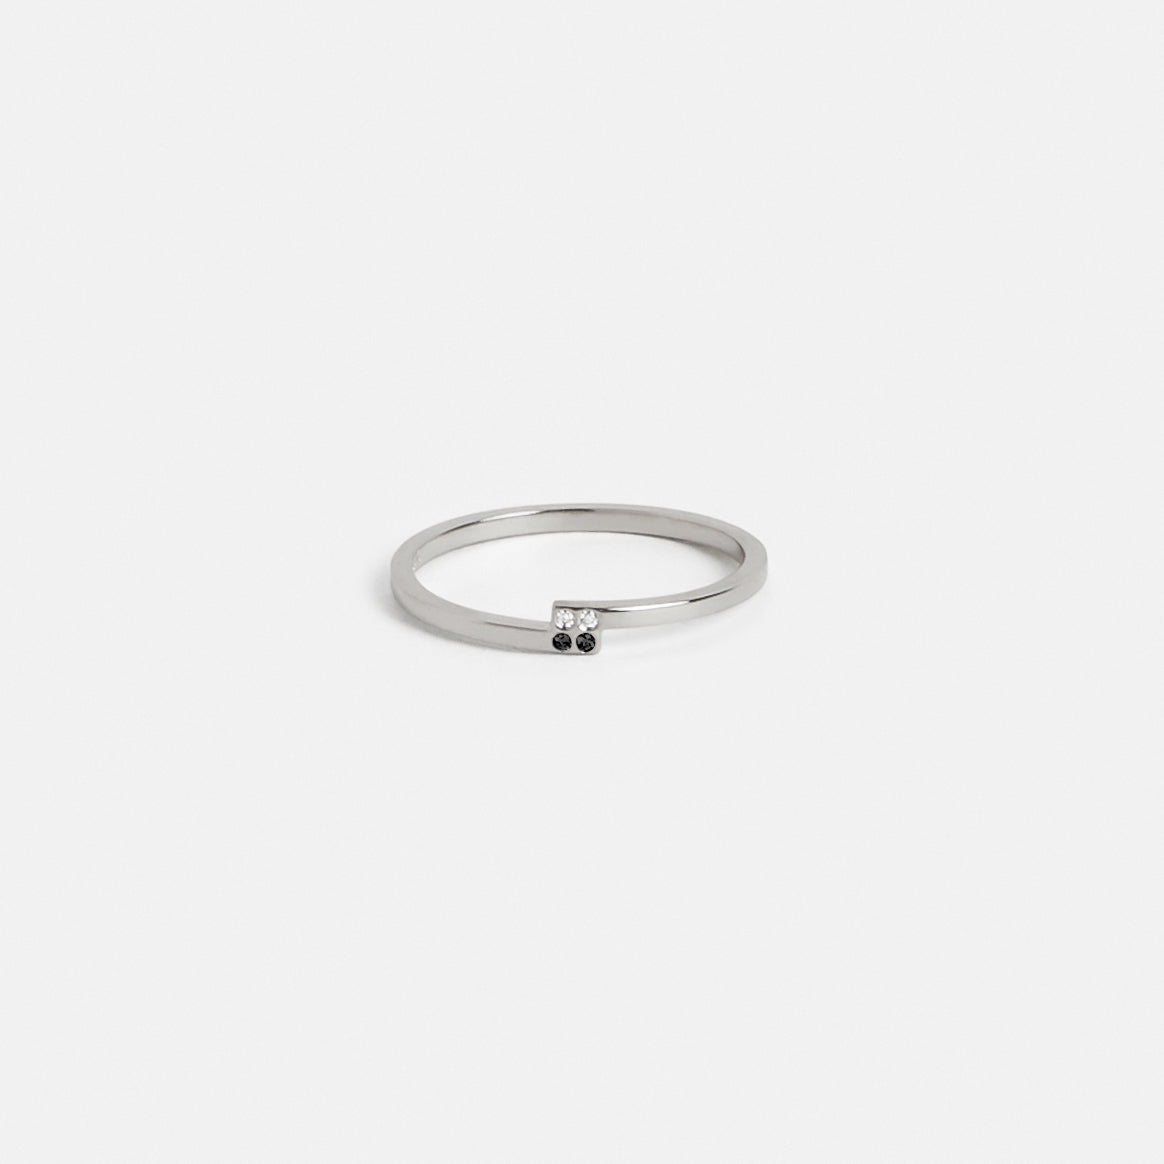 Piva Thin Ring in 14k Gold set with Black and White Diamonds By SHW Fine Jewelry NYC